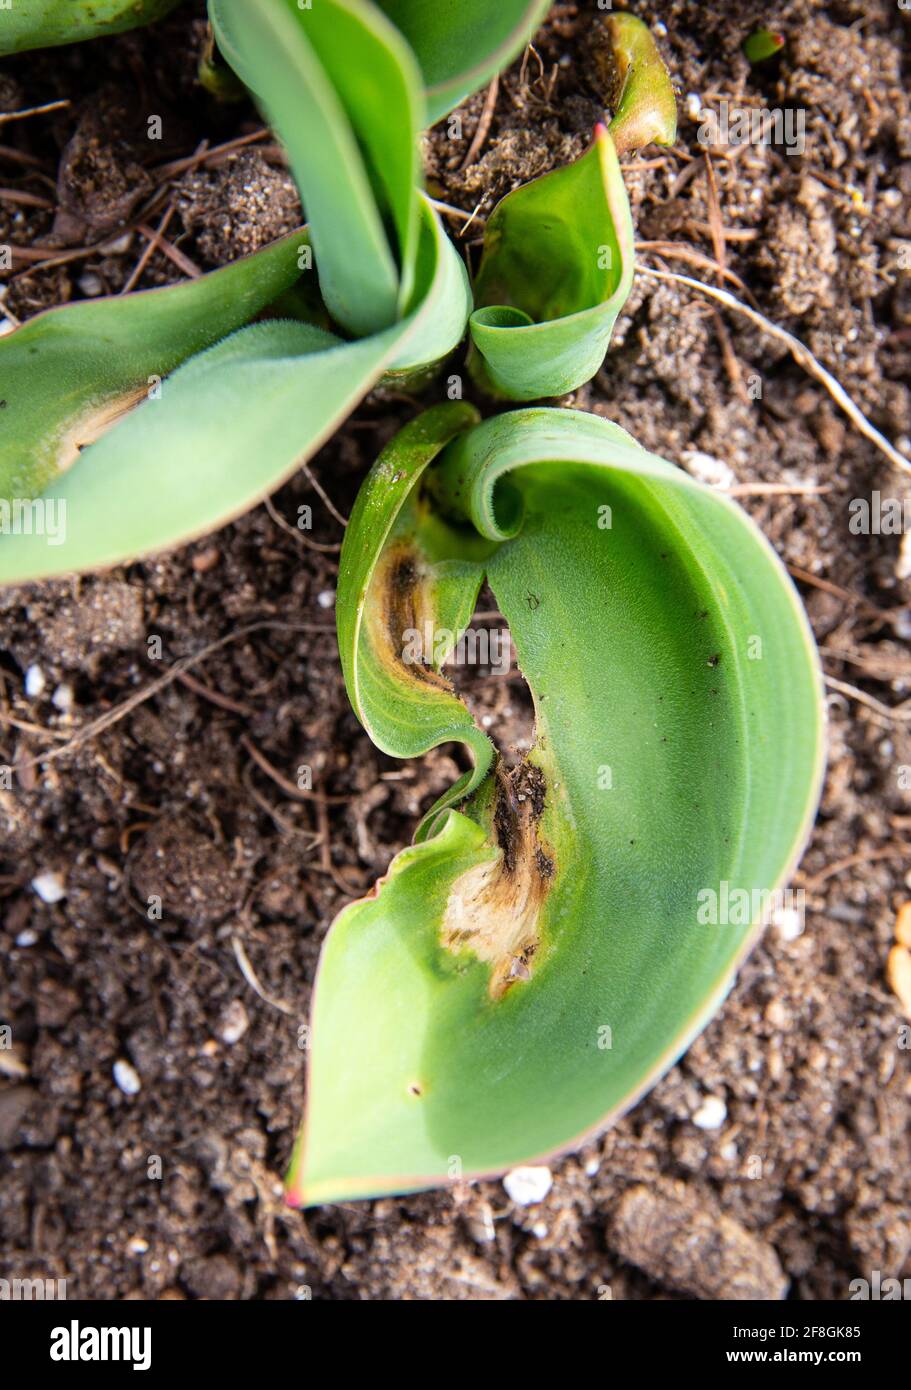 Botrytis tulipae is fungus that causes disease called tulip fire of flower tulips(Tulipa). Close up view of damaged tulip leaves in spring. Stock Photo